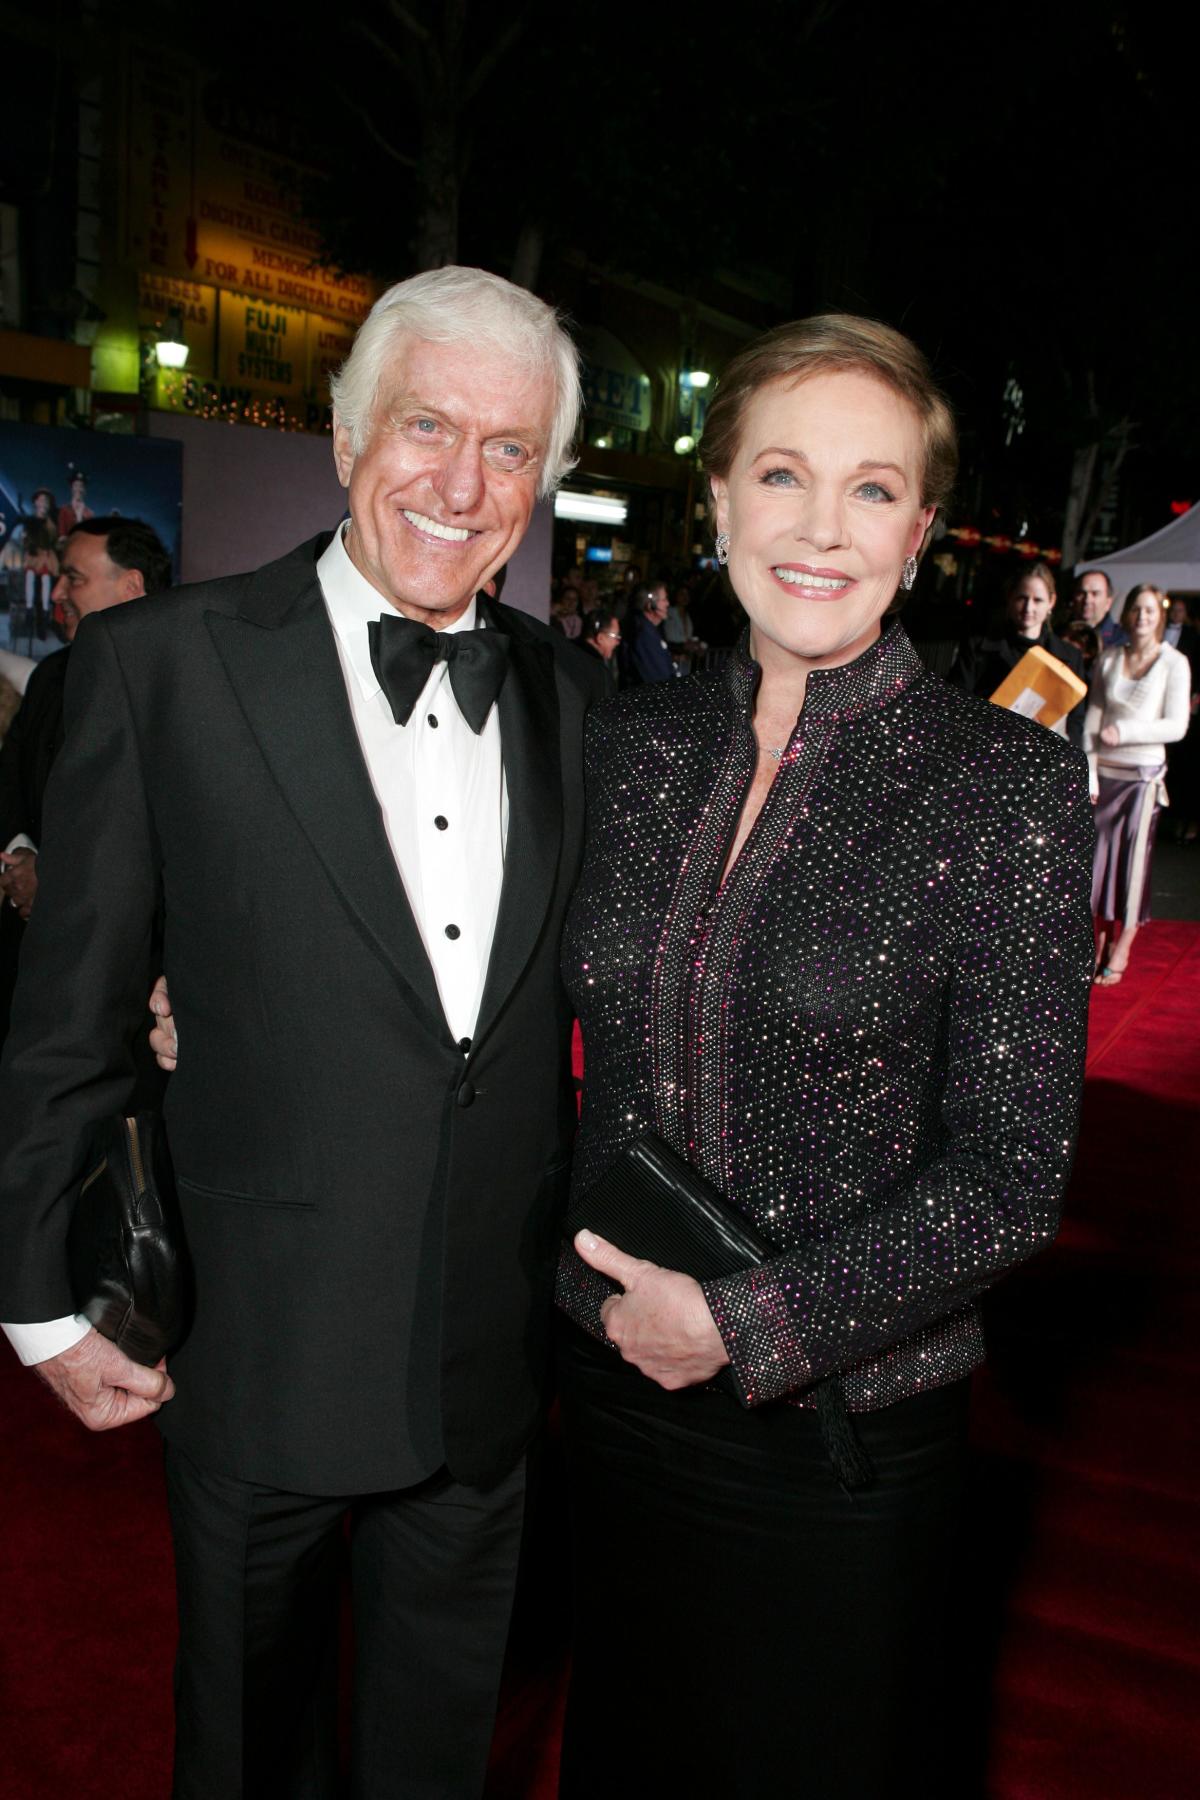 Dick Van Dyke ‘Lucked Out’ Working With Julie Andrews on ‘Mary Poppins’: ‘We Enjoyed Ourselves’